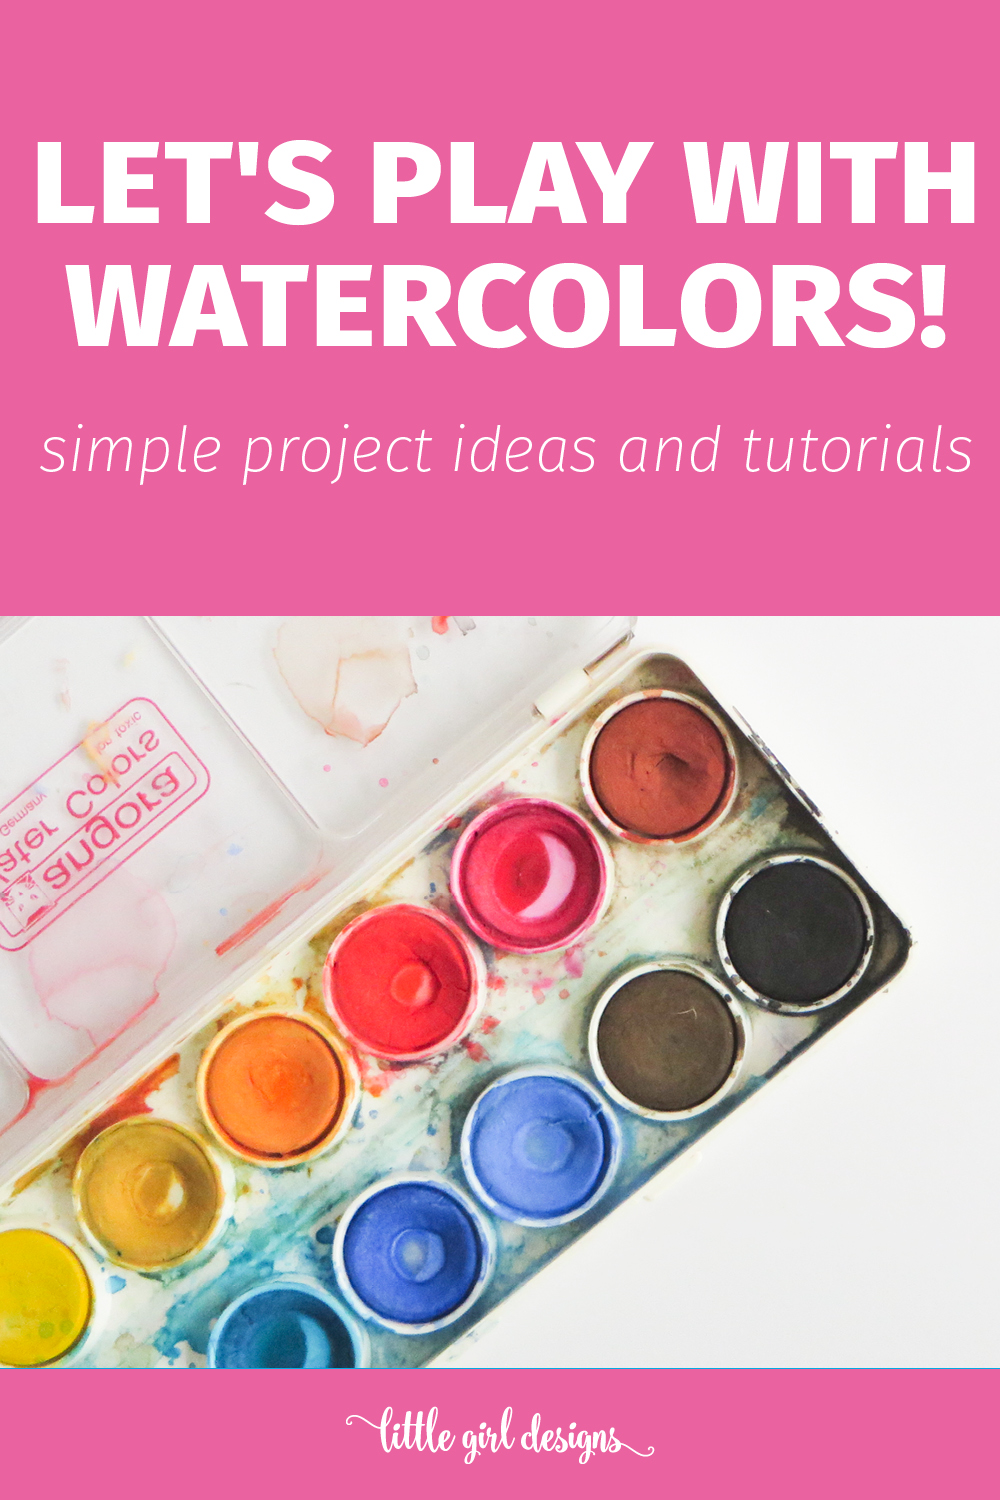 Play with Watercolors!